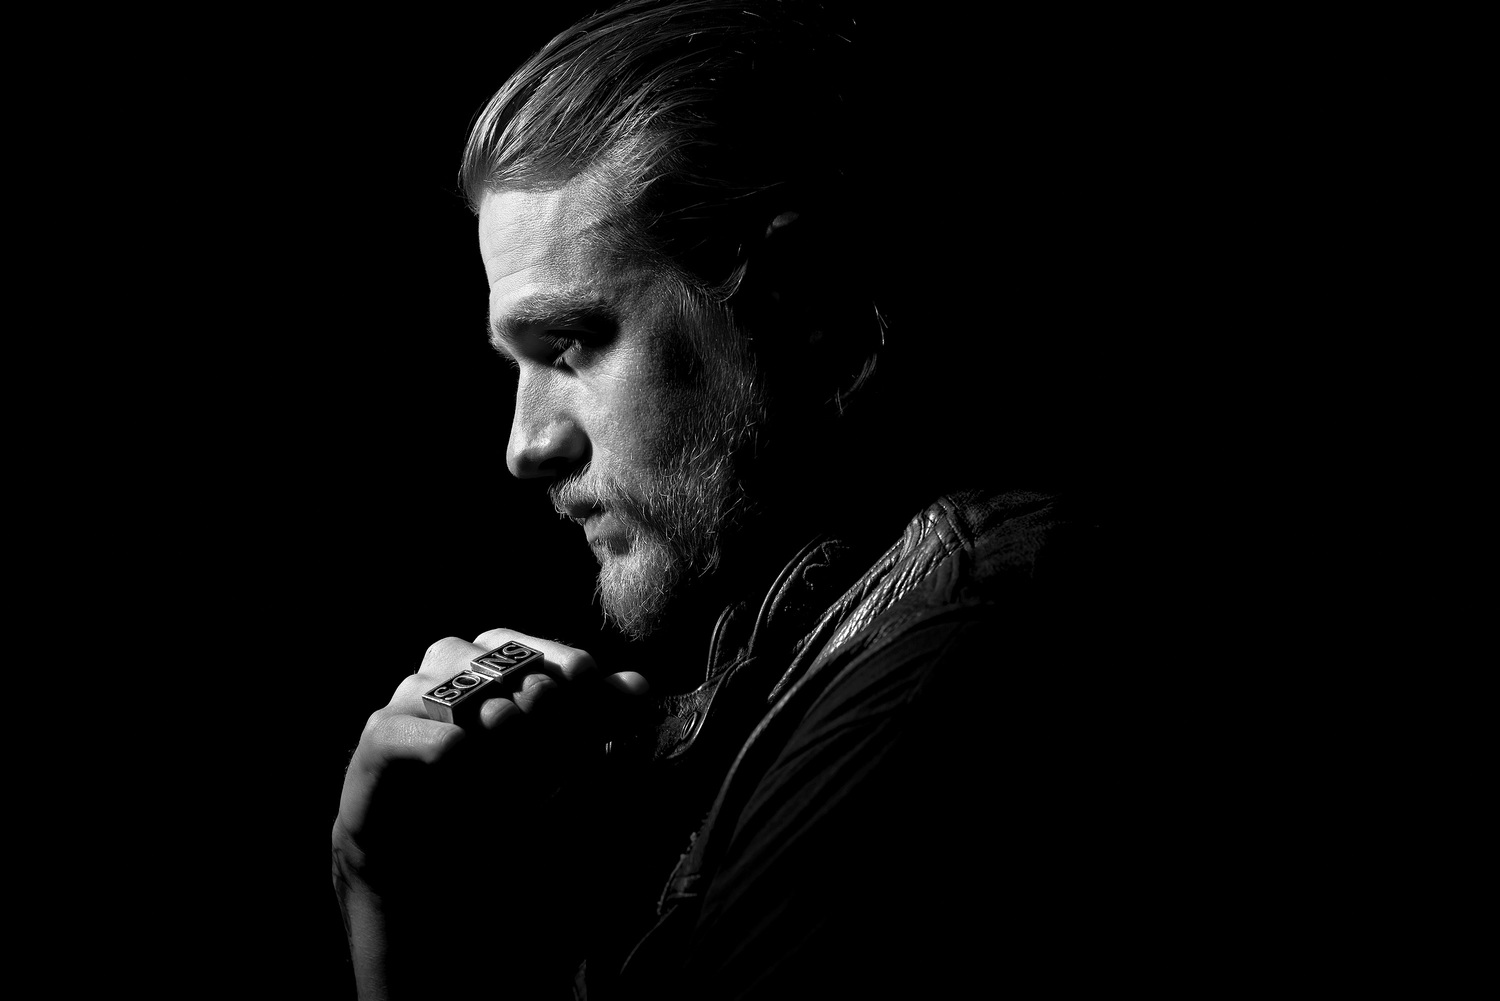 Sons of Anarchy series finale recap: 'Papa's Goods